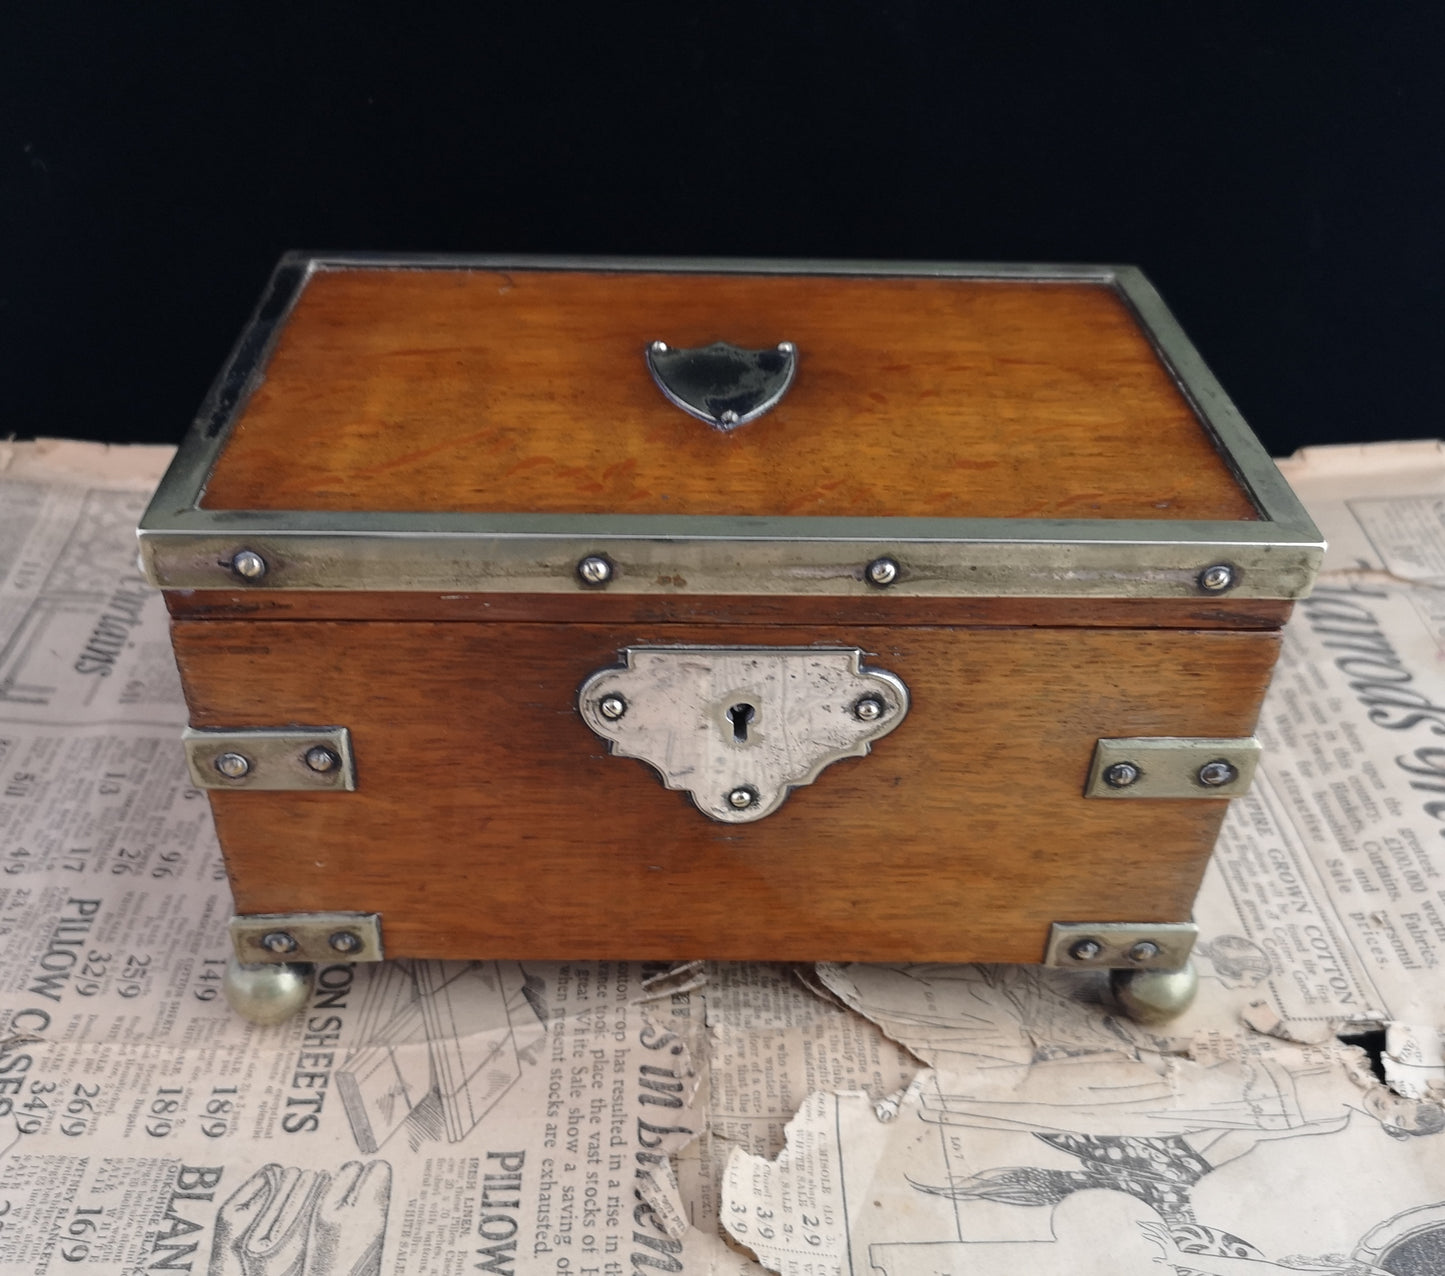 Antique oak and silver plated jewellery box